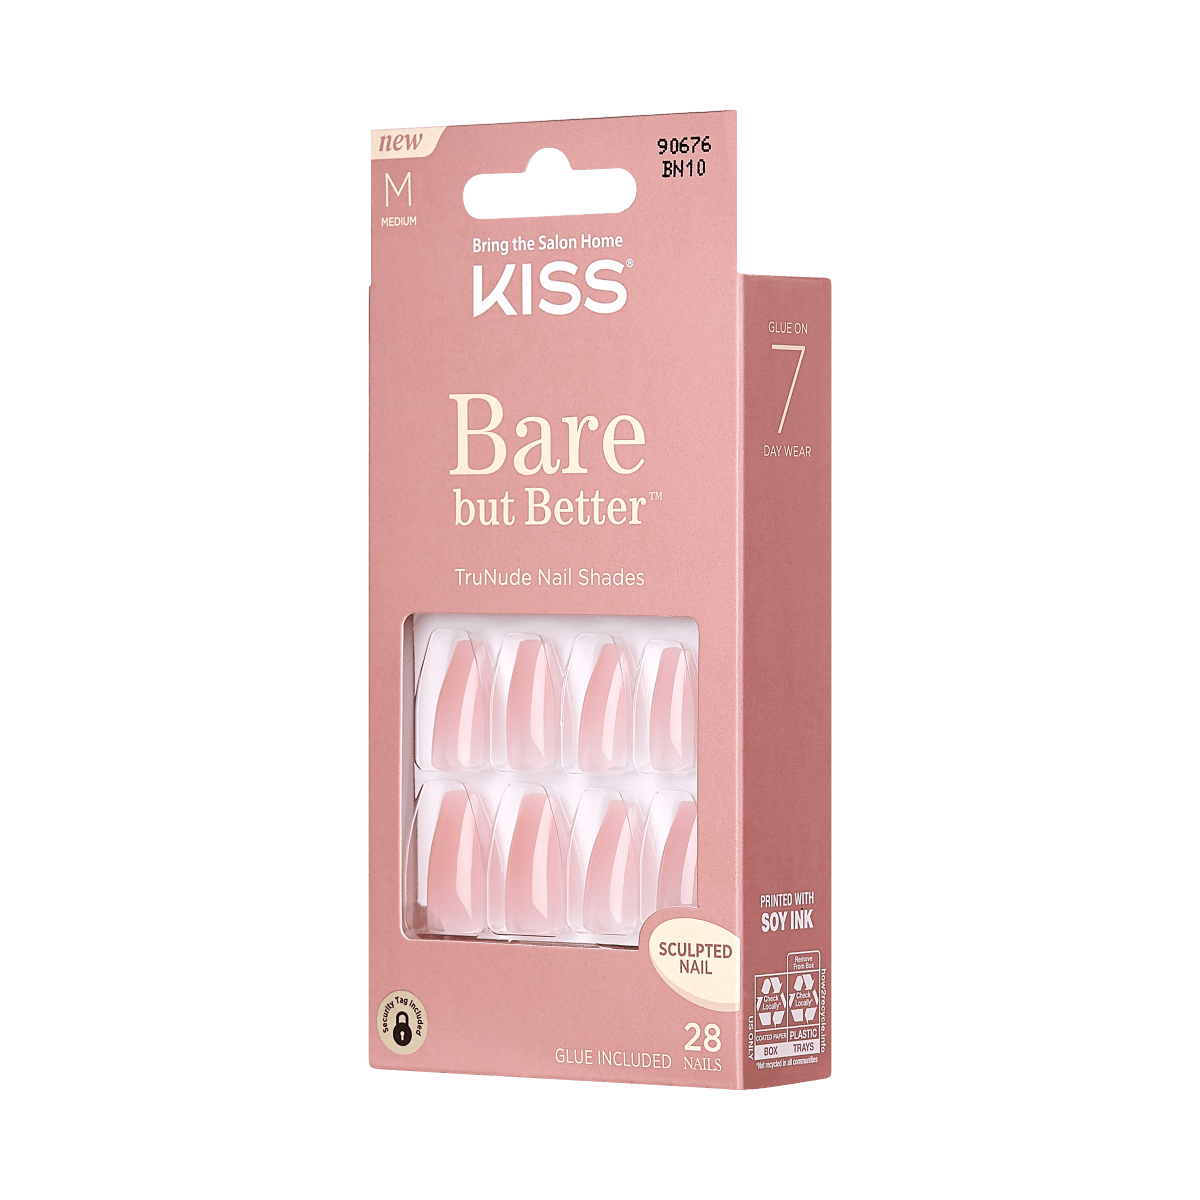 KISS Bare-But-Better TruNude Press-On Nails, Medium Length, Coffin ...